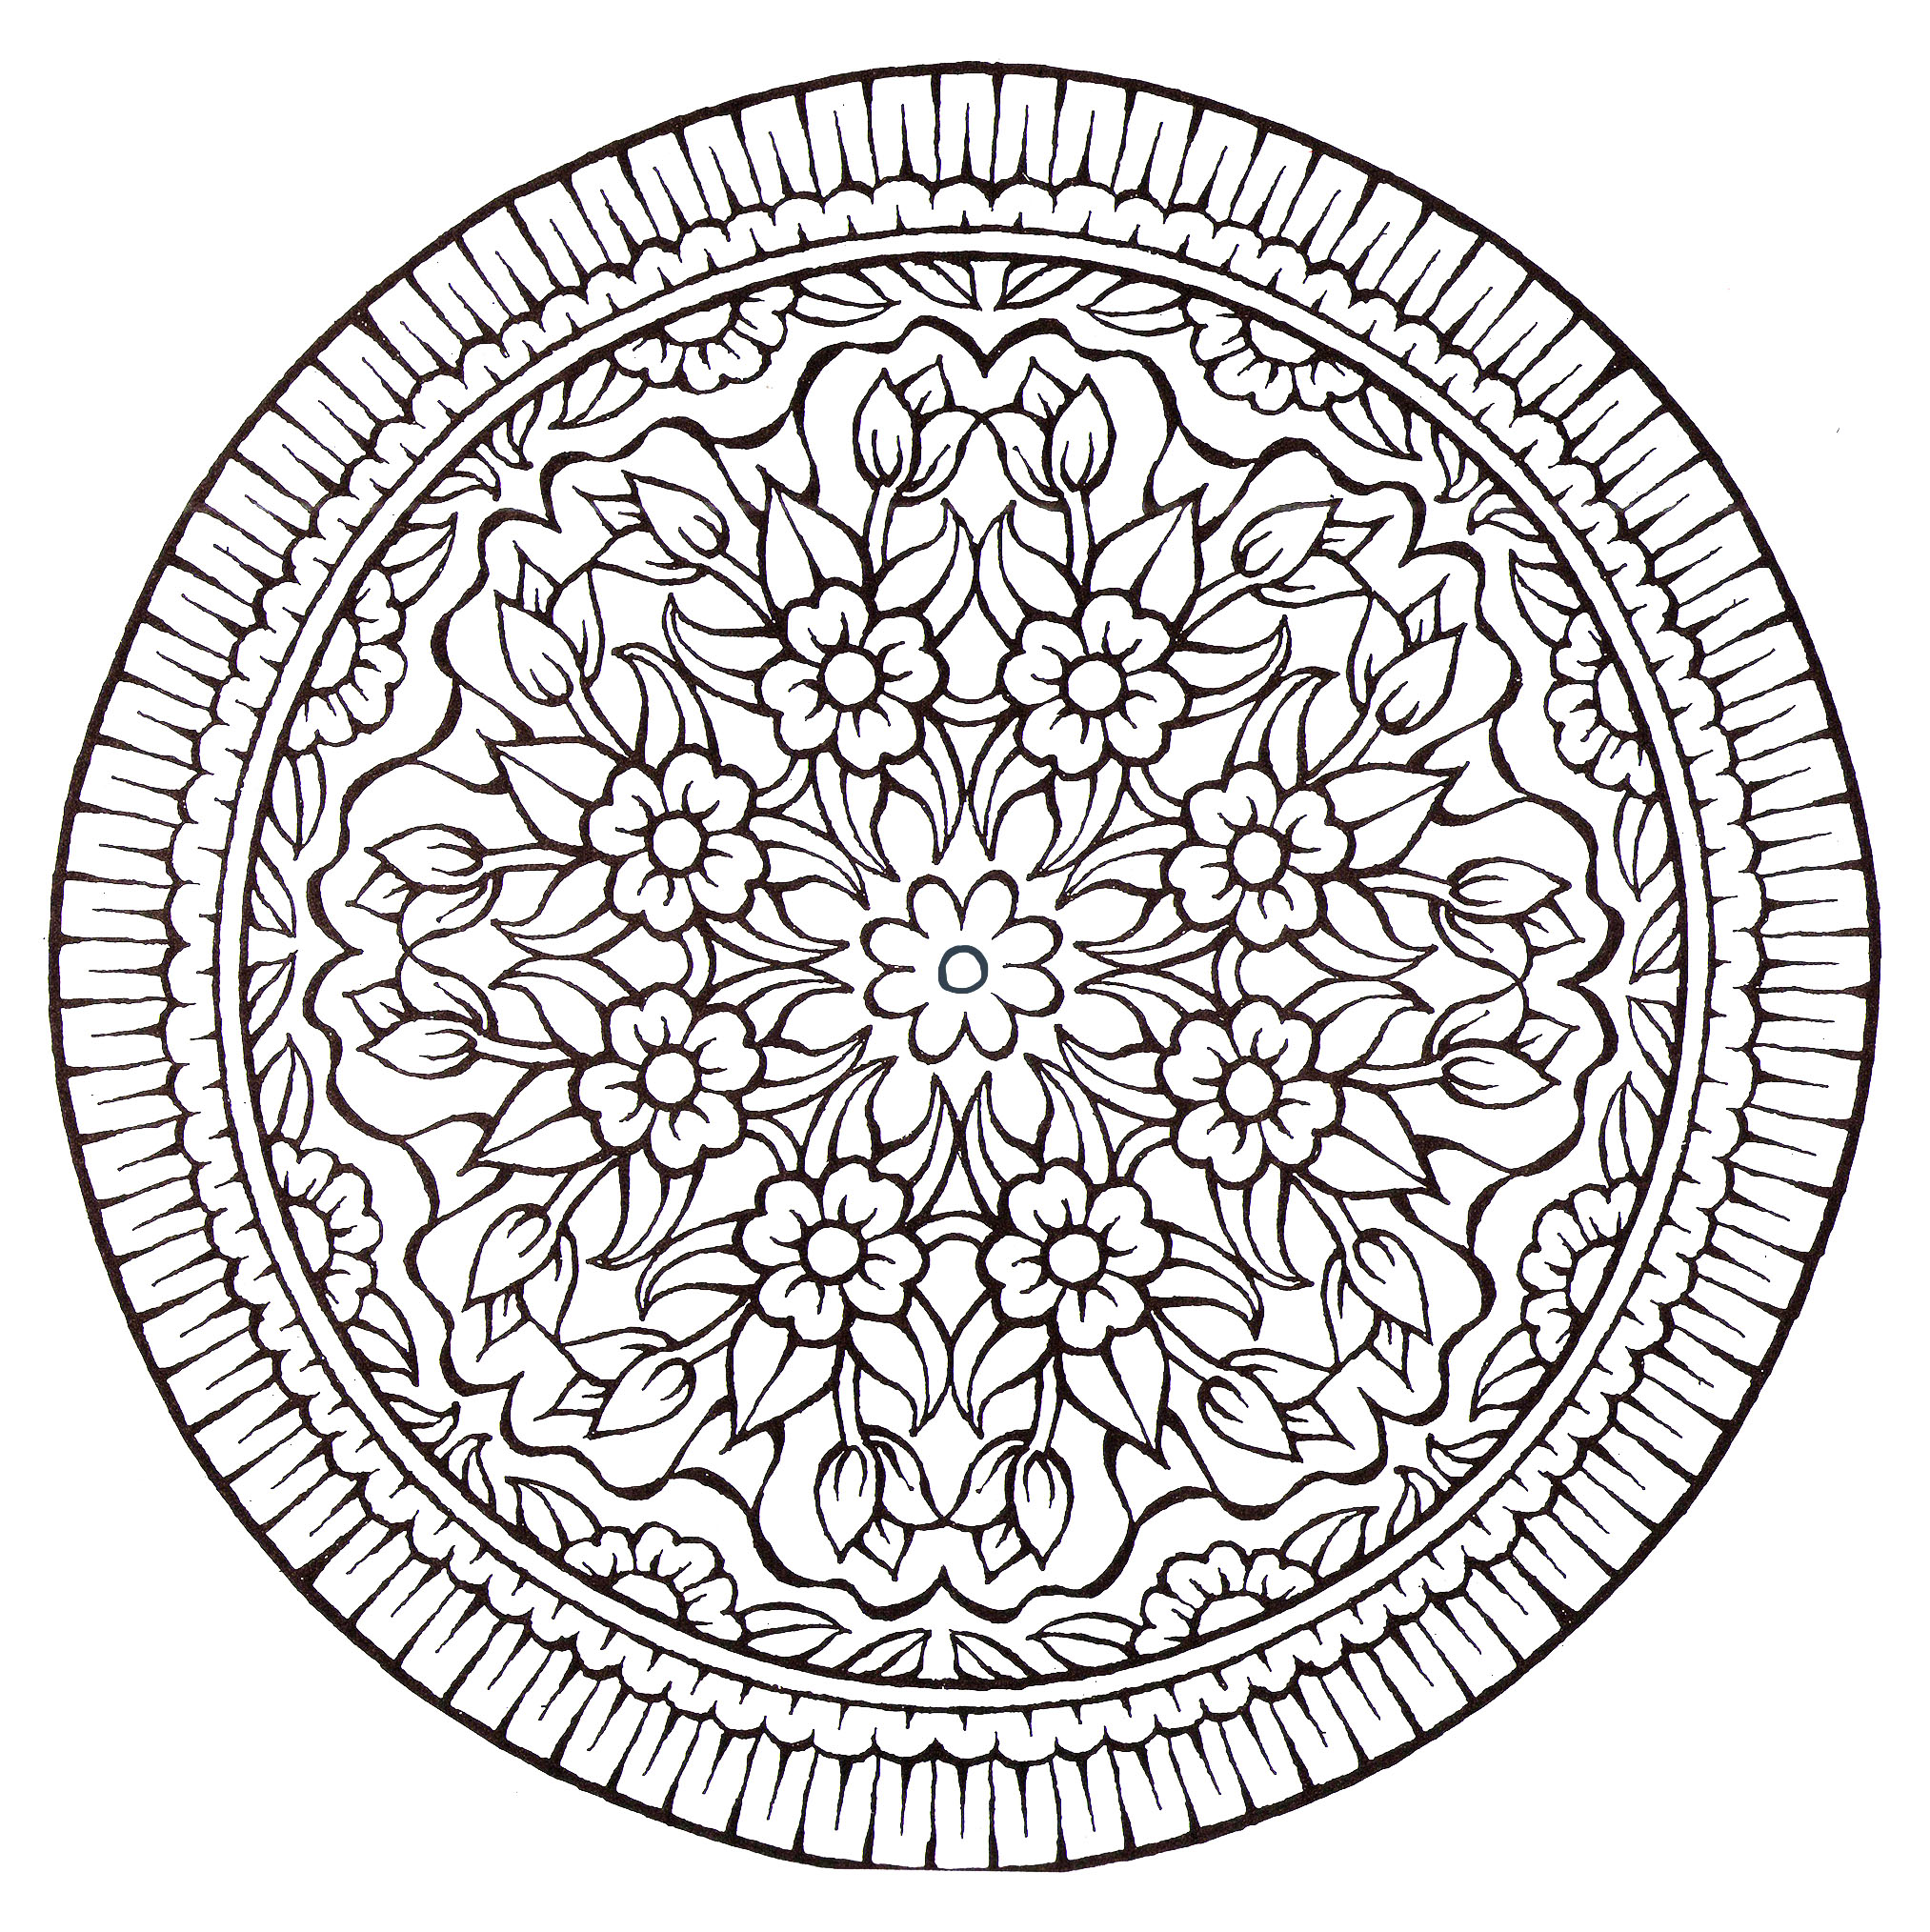 A Mandala very 'Vintage style', with a lot of flowers